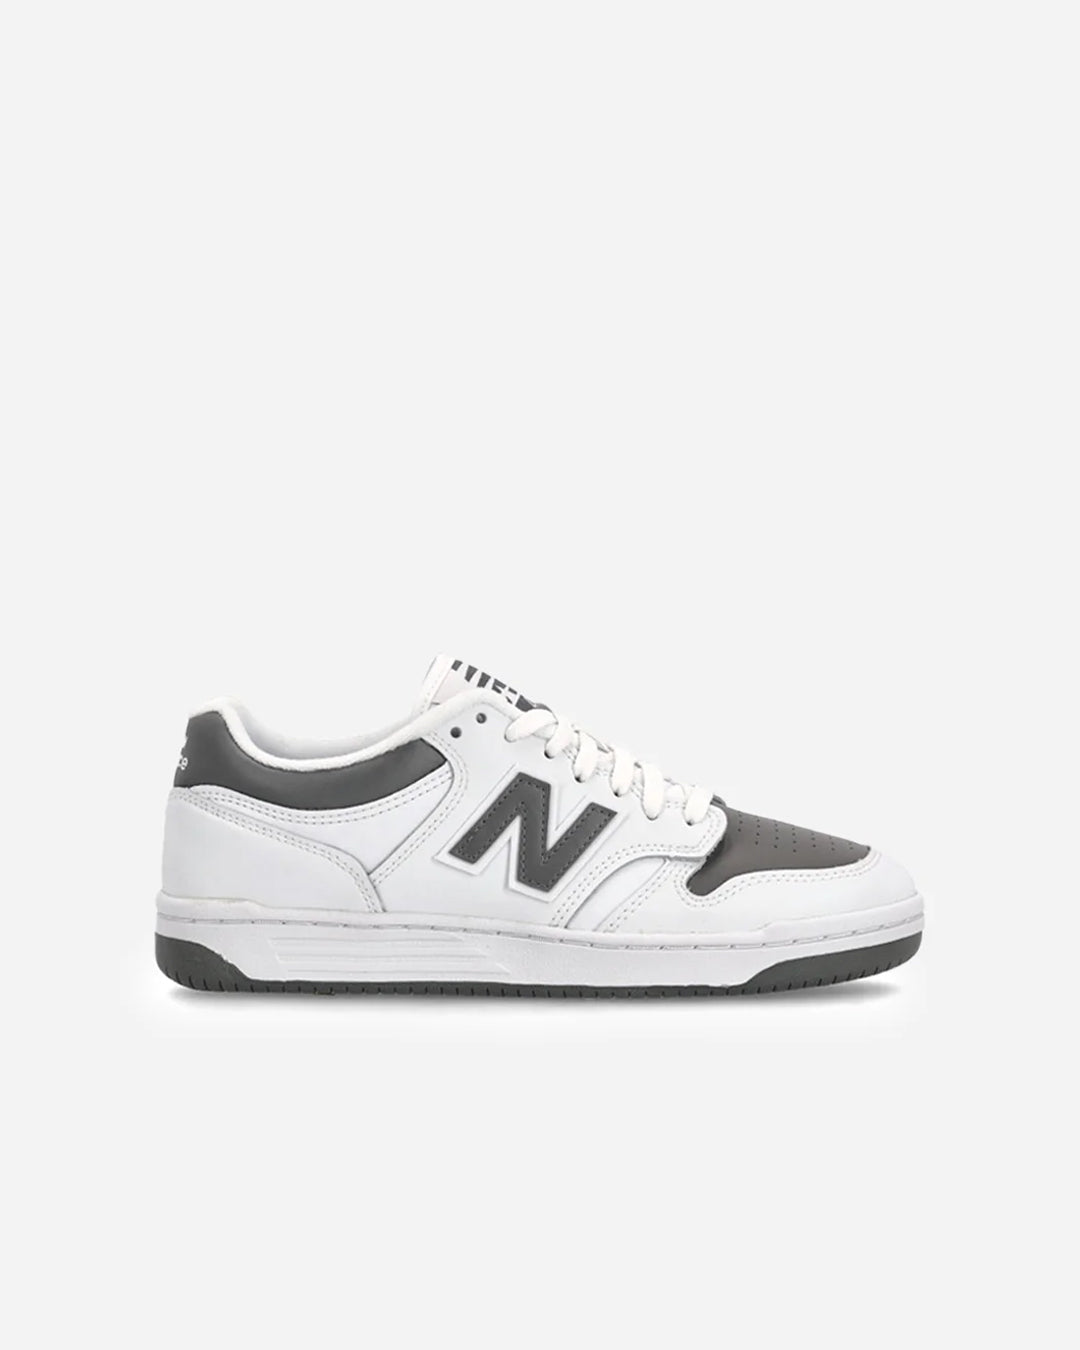 New Balance – HUNDRED PERCENT | Malaysia Streetwear and Sneakers Multi ...